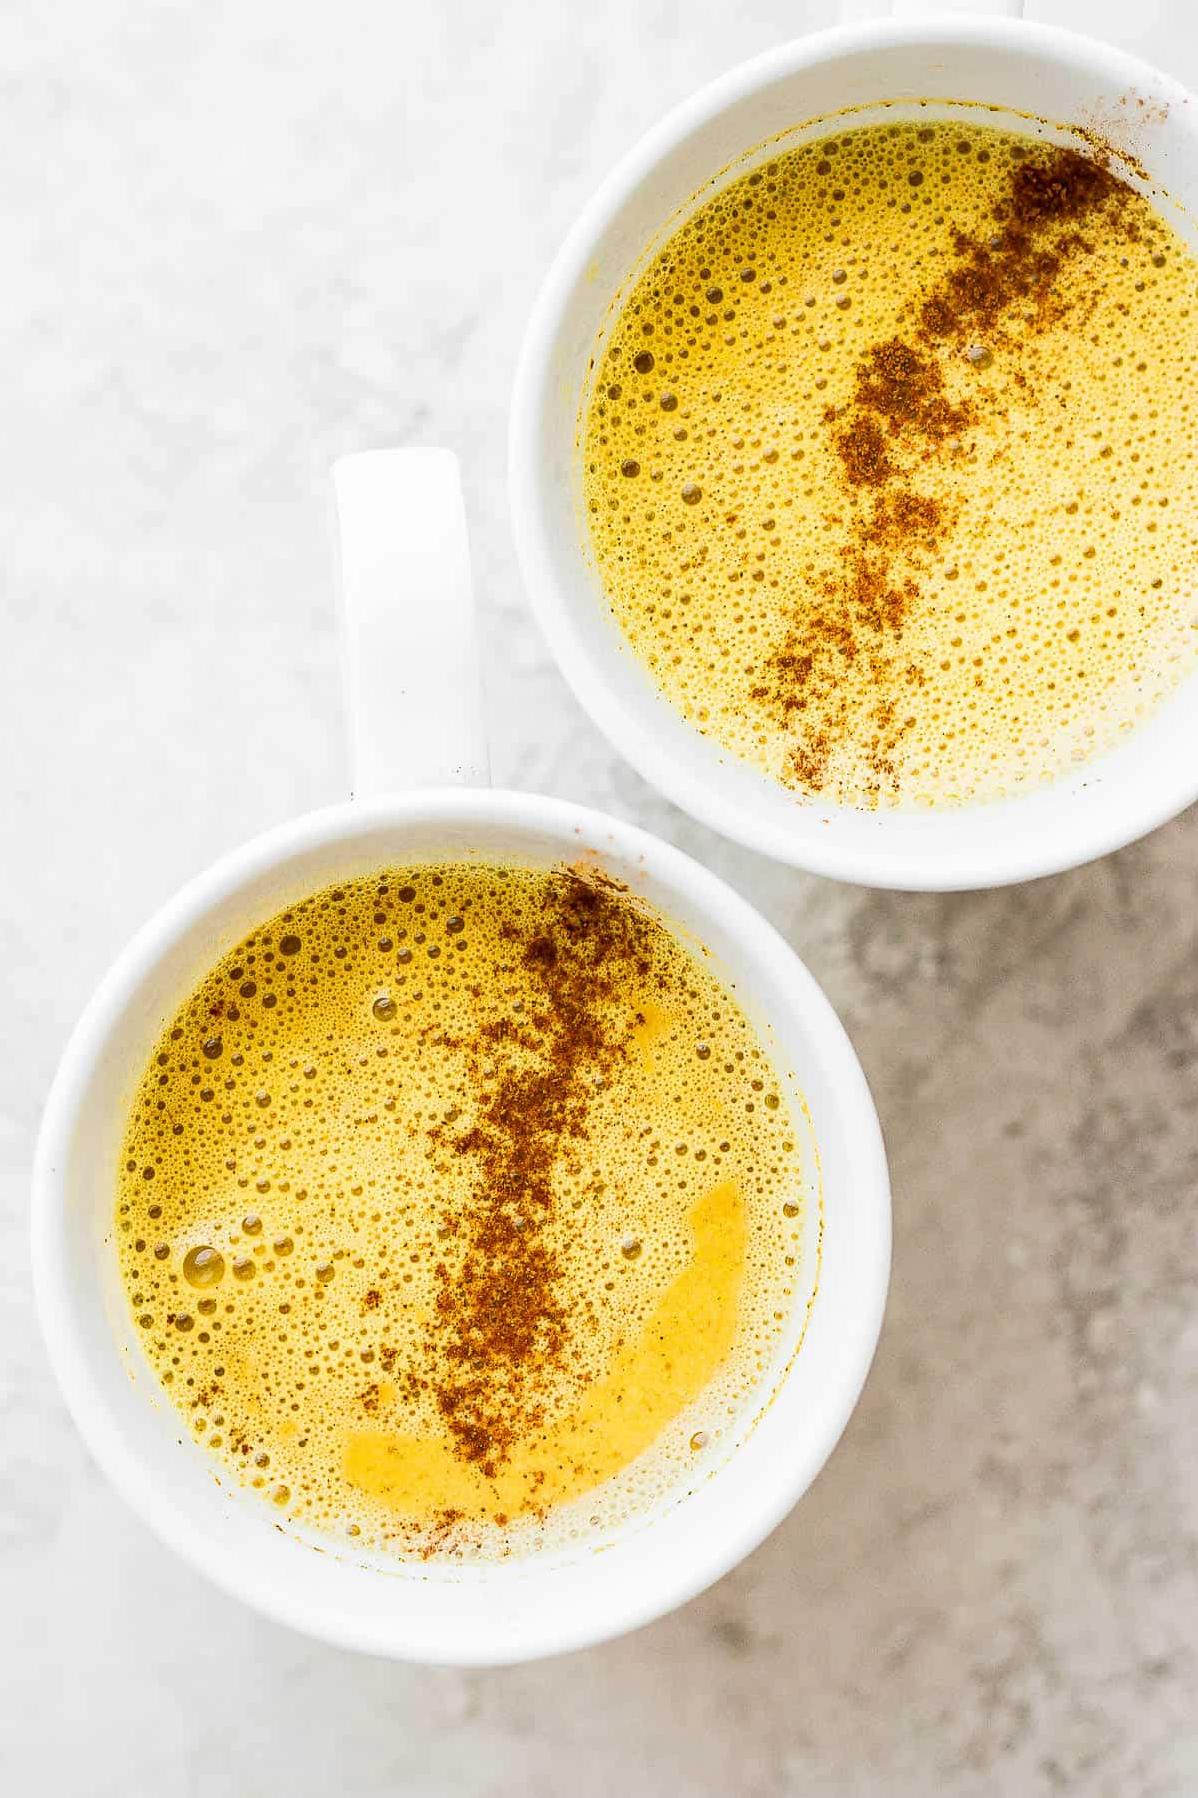 Supercharge Your Day with This Turmeric Latte Recipe